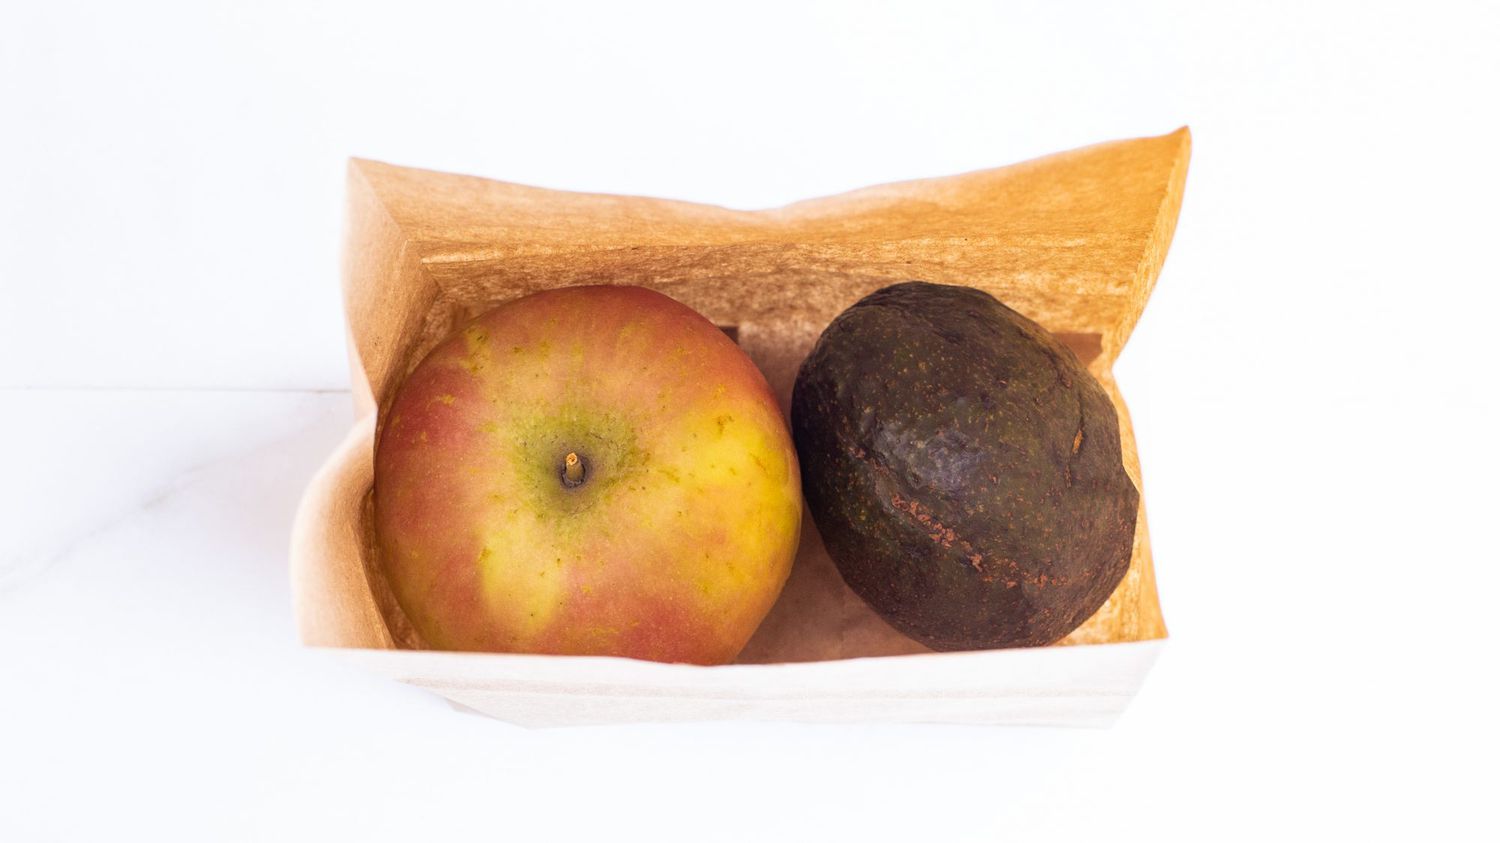 overhead view of avocado and apple in a brown paper bag